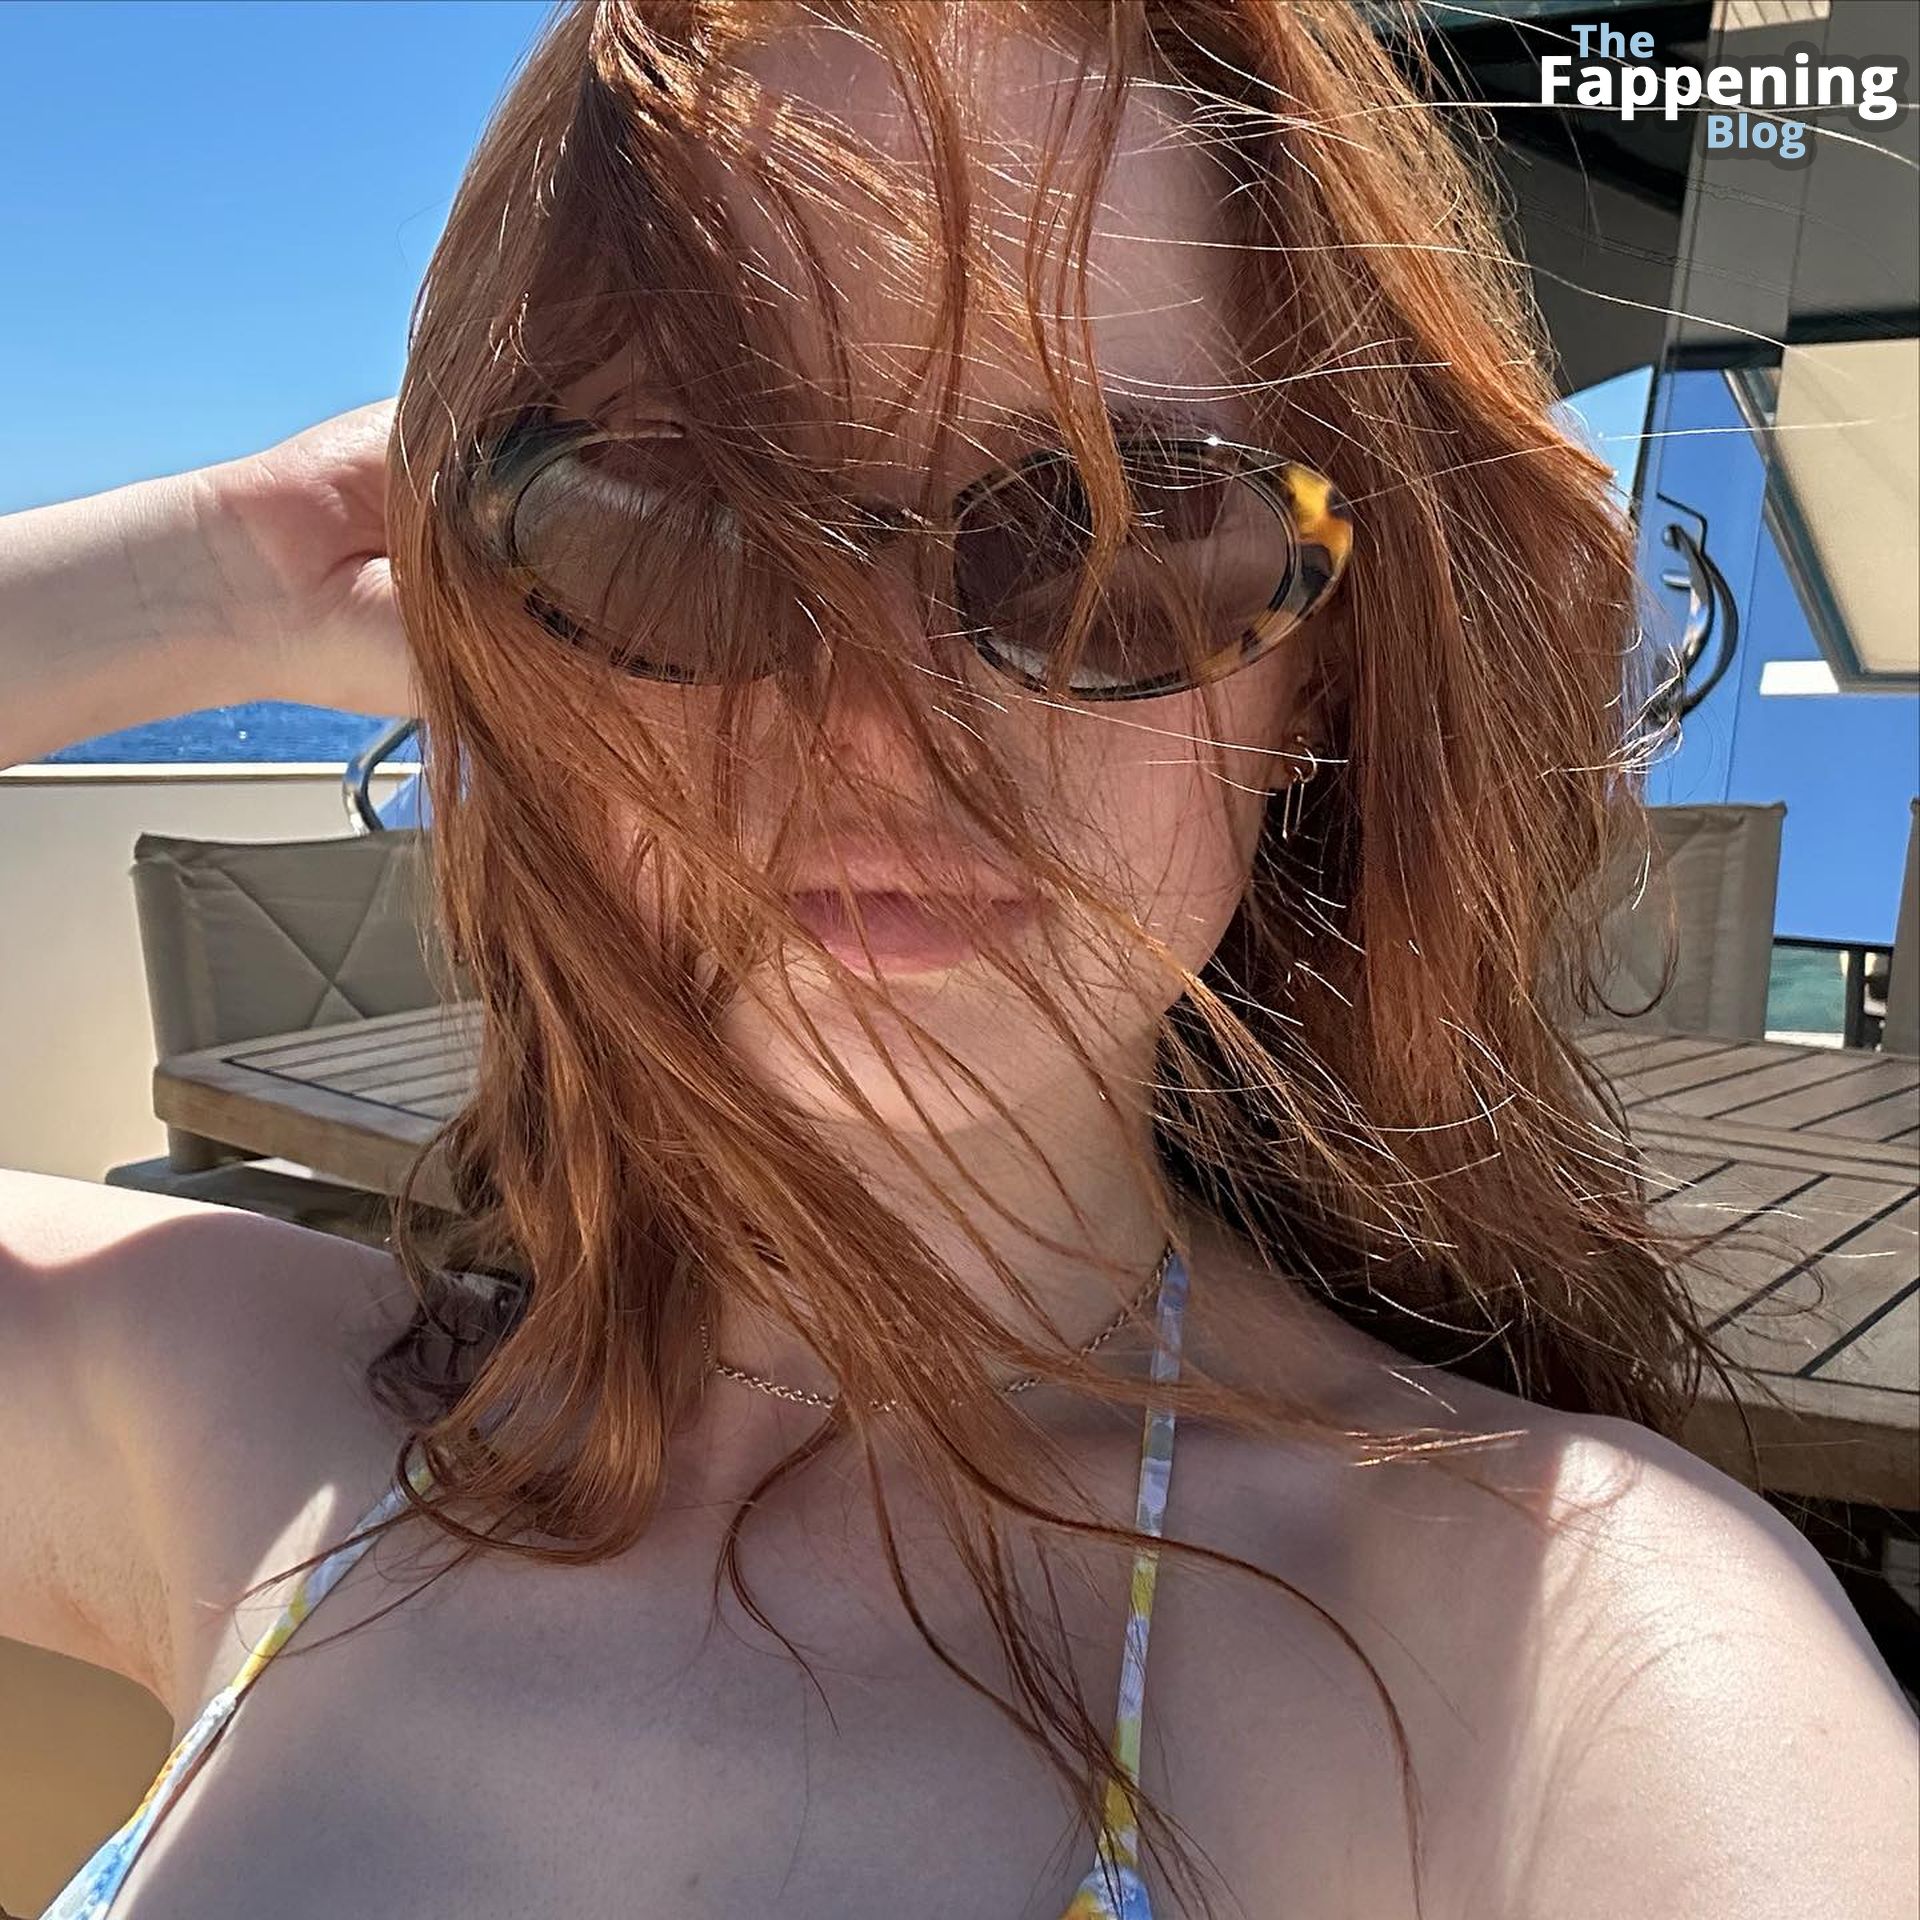 Madelaine-Petsch-Sexy-7-The-Fappening-Blog.jpg